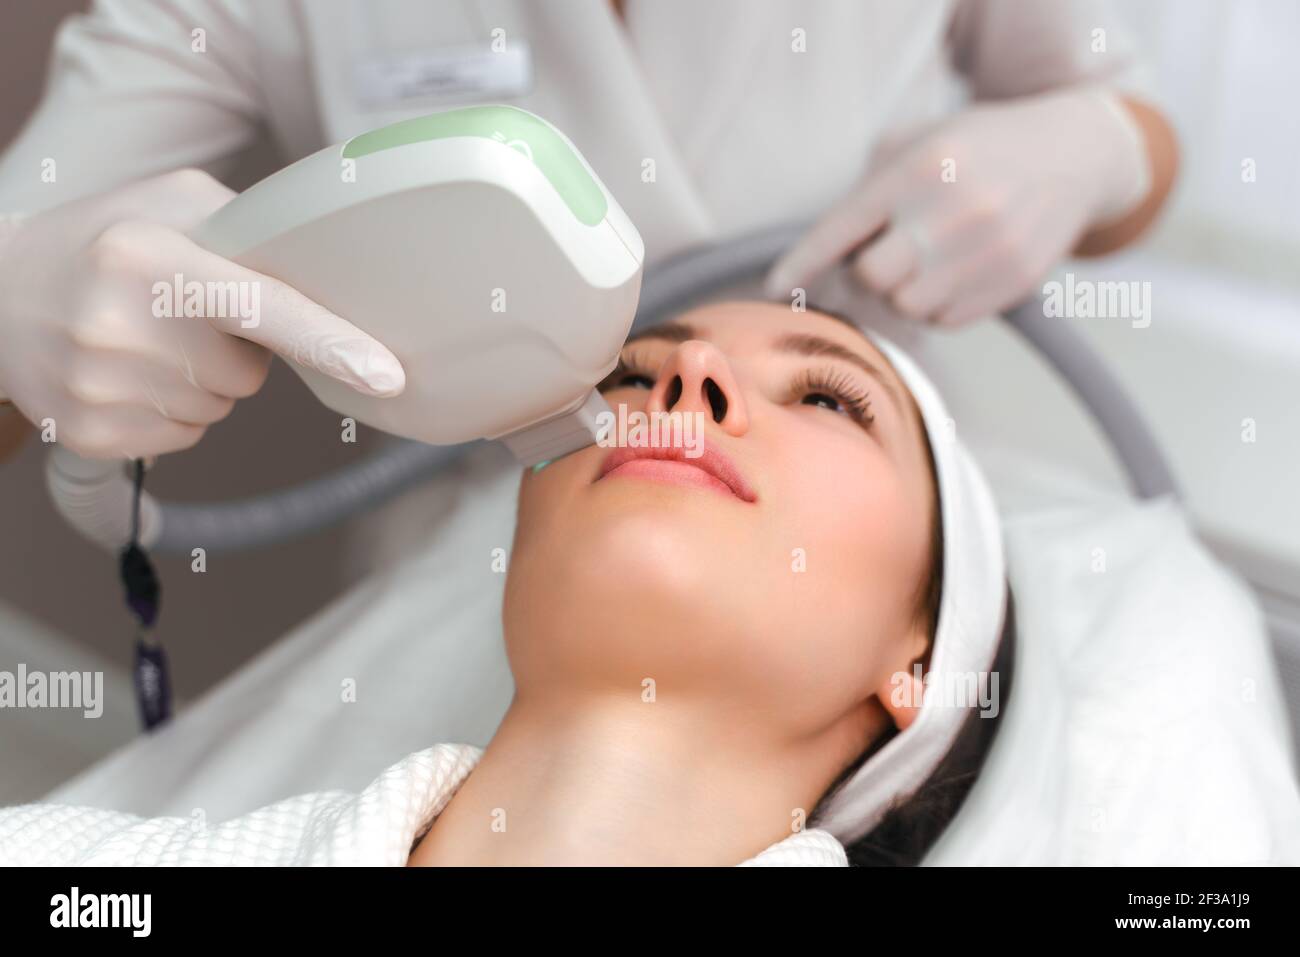 Woman Getting Facial Hydro Microdermabrasion Peeling Treatment At Cosmetic Beauty Spa Clinic. Hydra Vacuum Cleaner. Exfoliation, Rejuvenation And Stock Photo